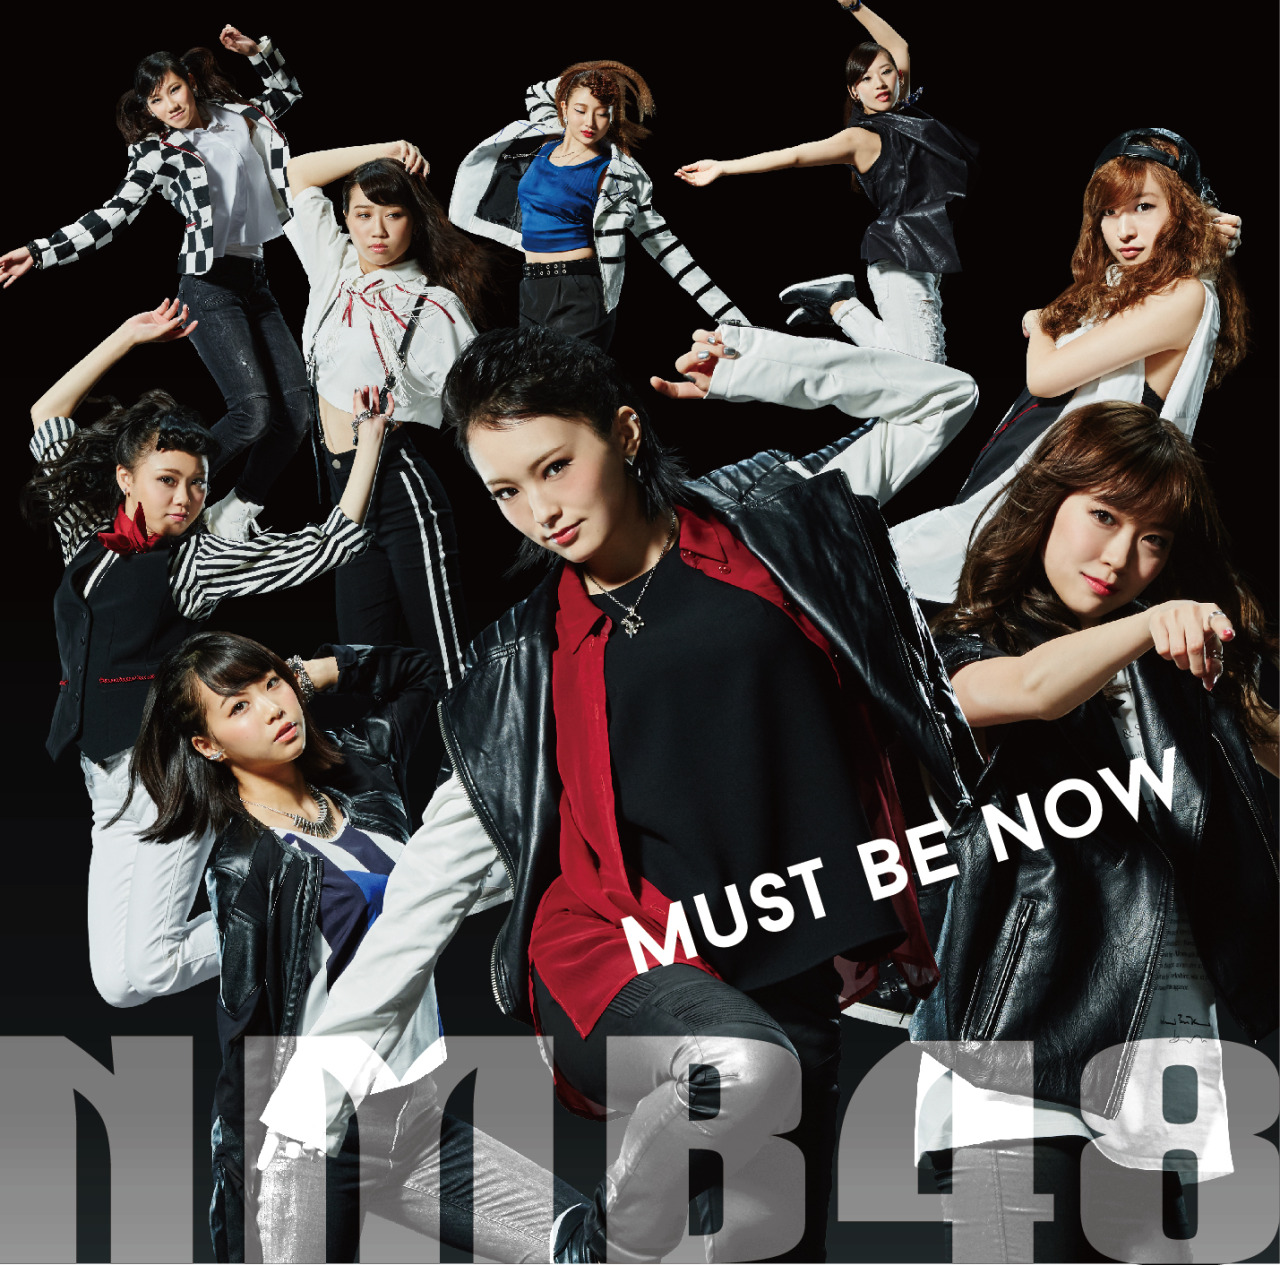 NMB48 Must be now cover artwork